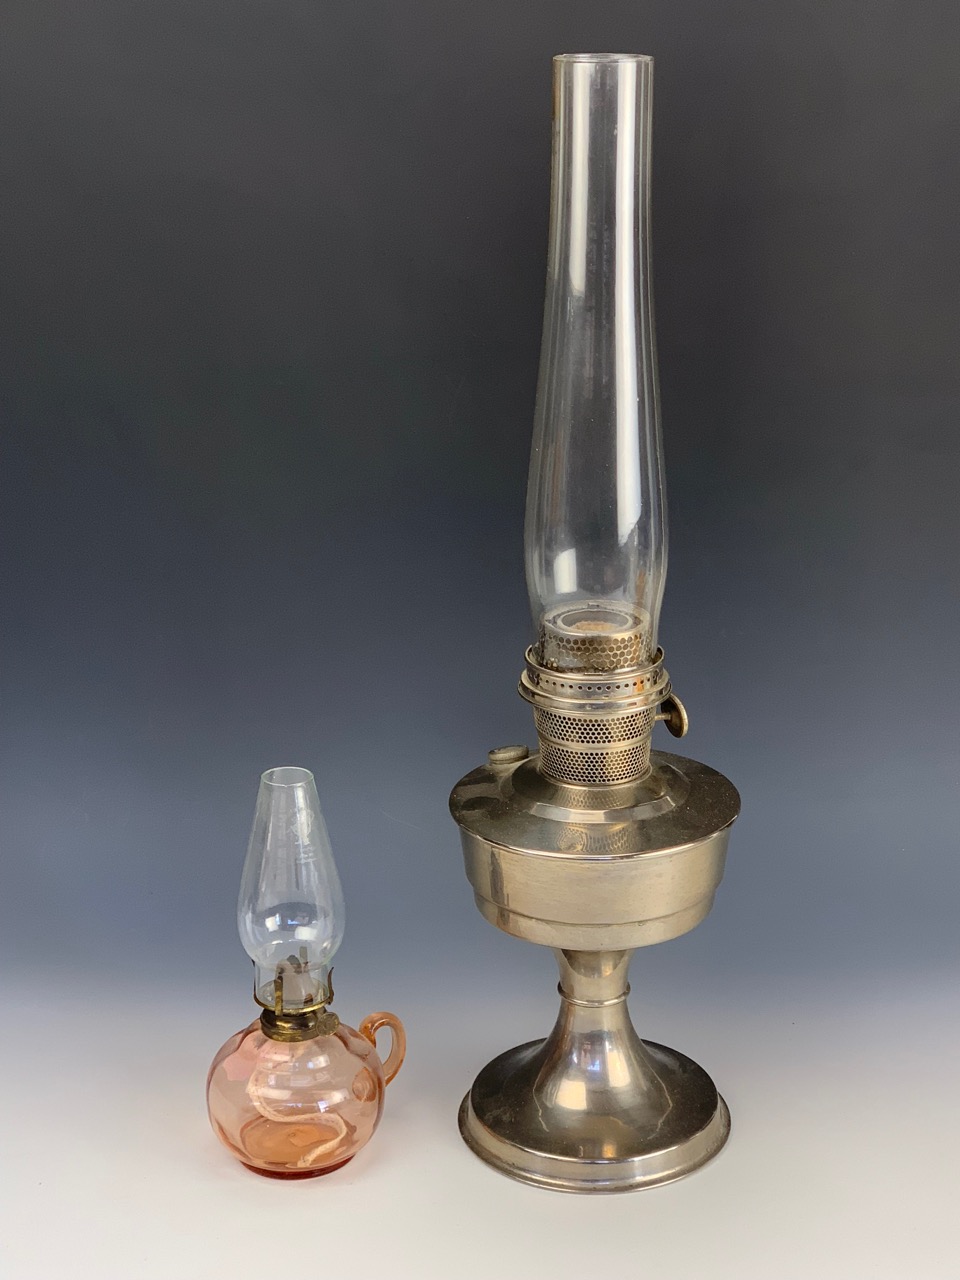 A Super Aladdin paraffin lamp together with a finger oil lamp